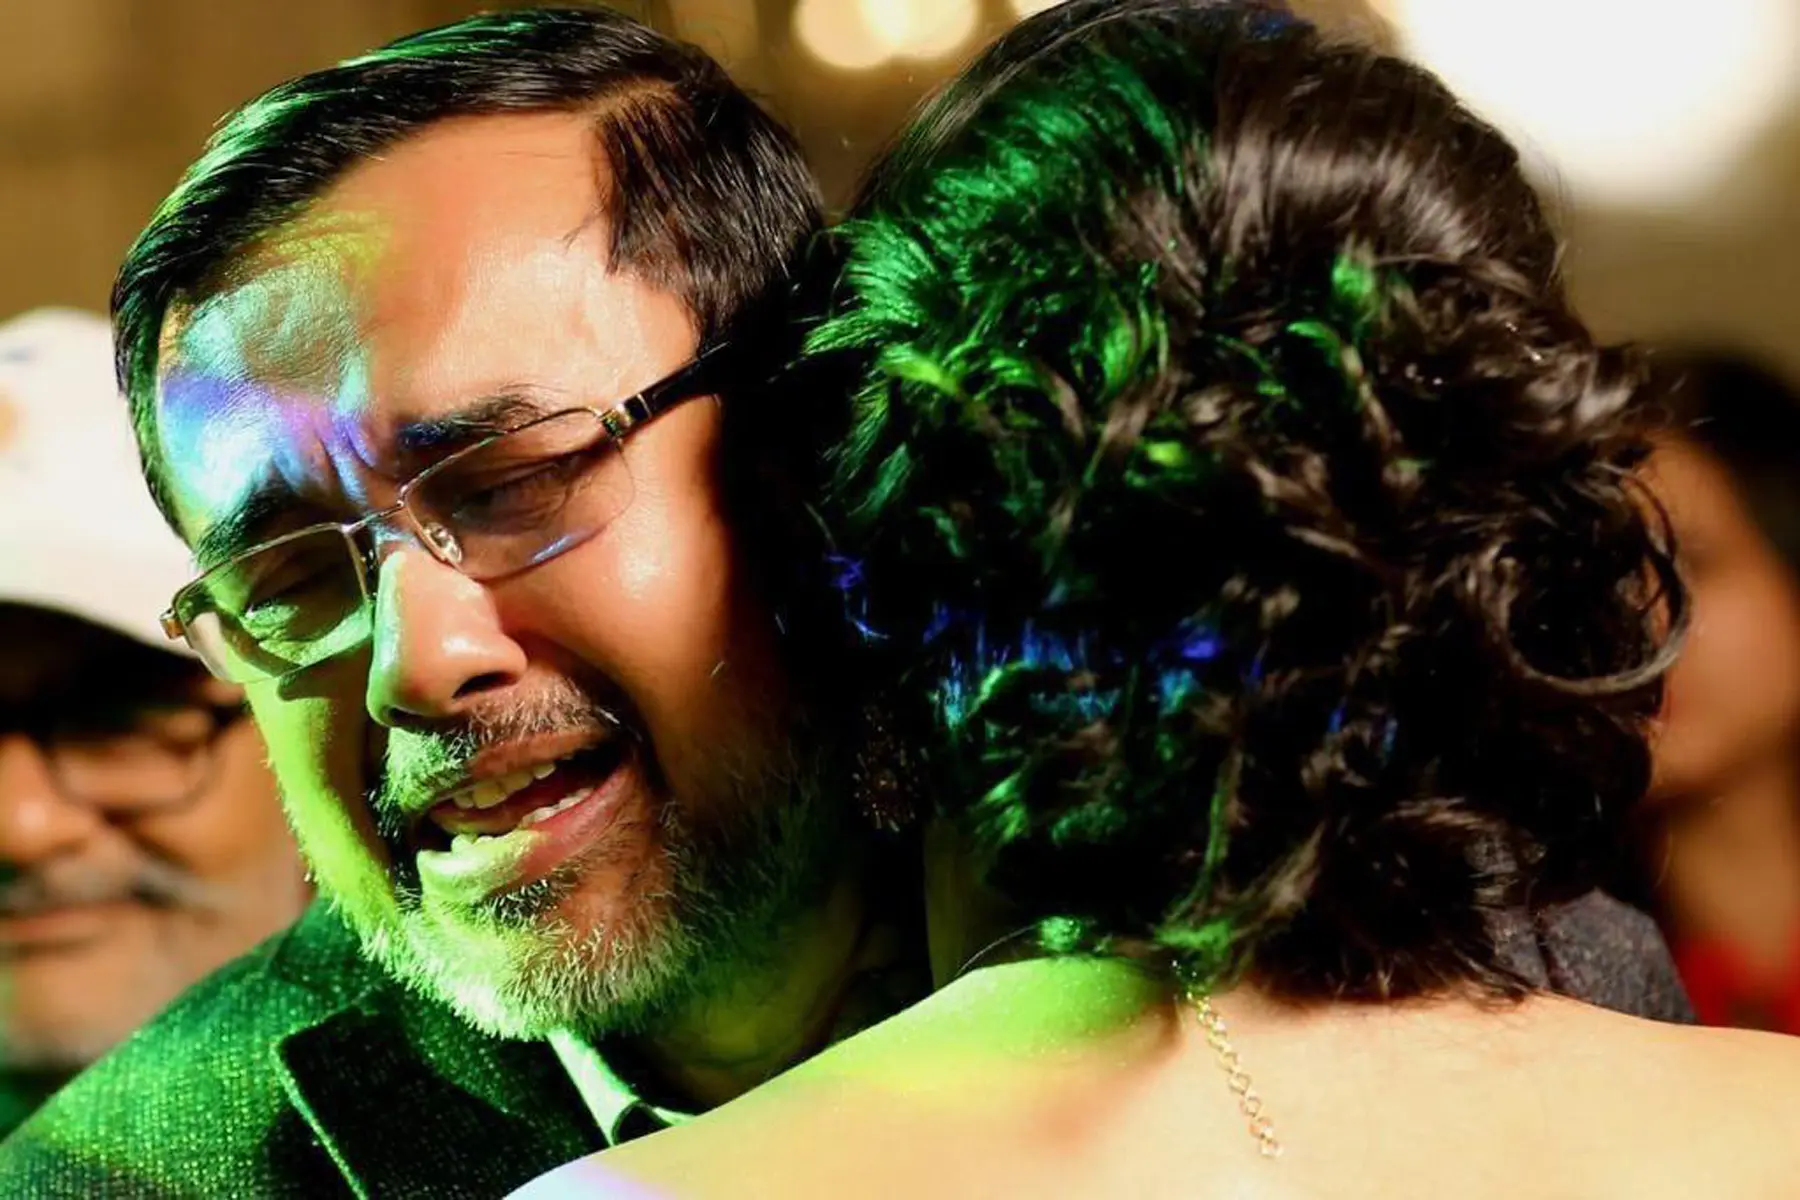 Witness the heartfelt moment between a father and daughter as they share a tearful embrace on her wedding day. Studio Kings Photography captures the emotions that make Indian weddings truly special.